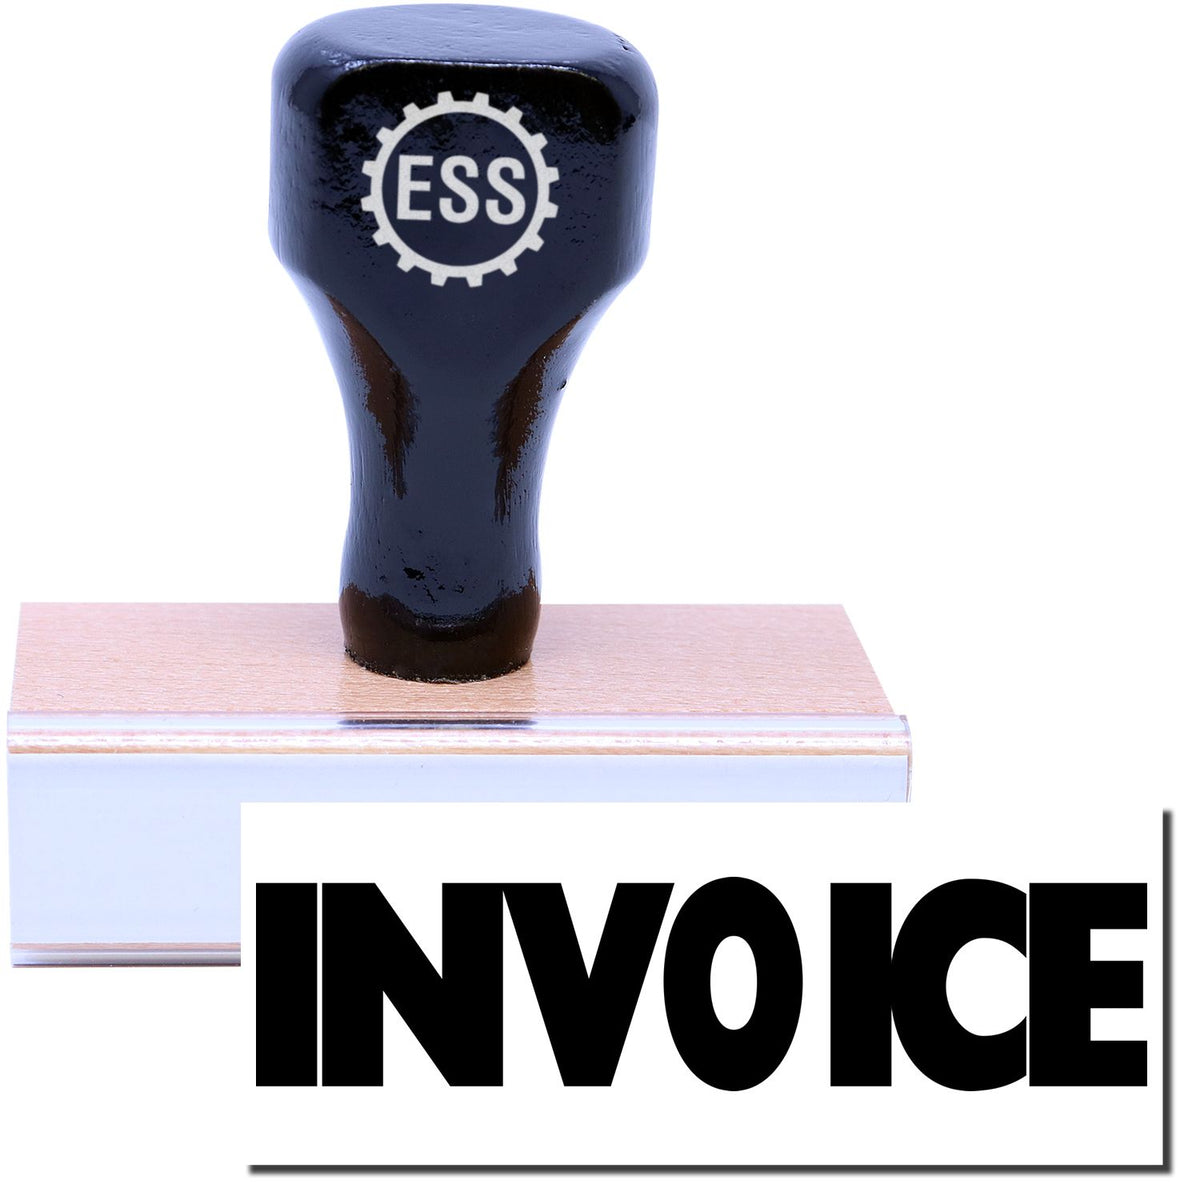 A stock office rubber stamp with a stamped image showing how the text &quot;INVOICE&quot; in a large font is displayed after stamping.